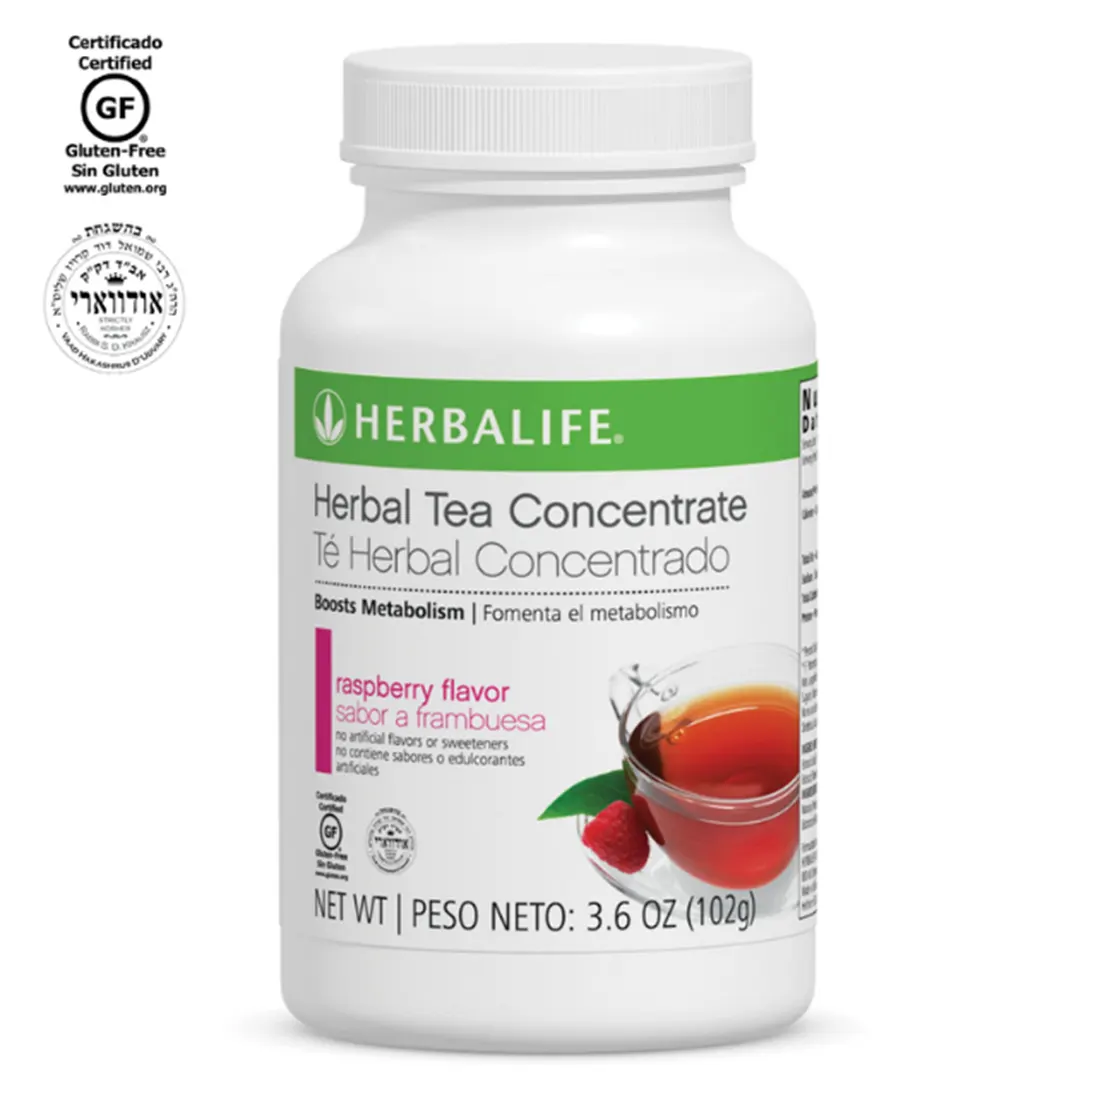 Herbal Tea Concentrate: Raspberry 3.6 Oz. (102g)